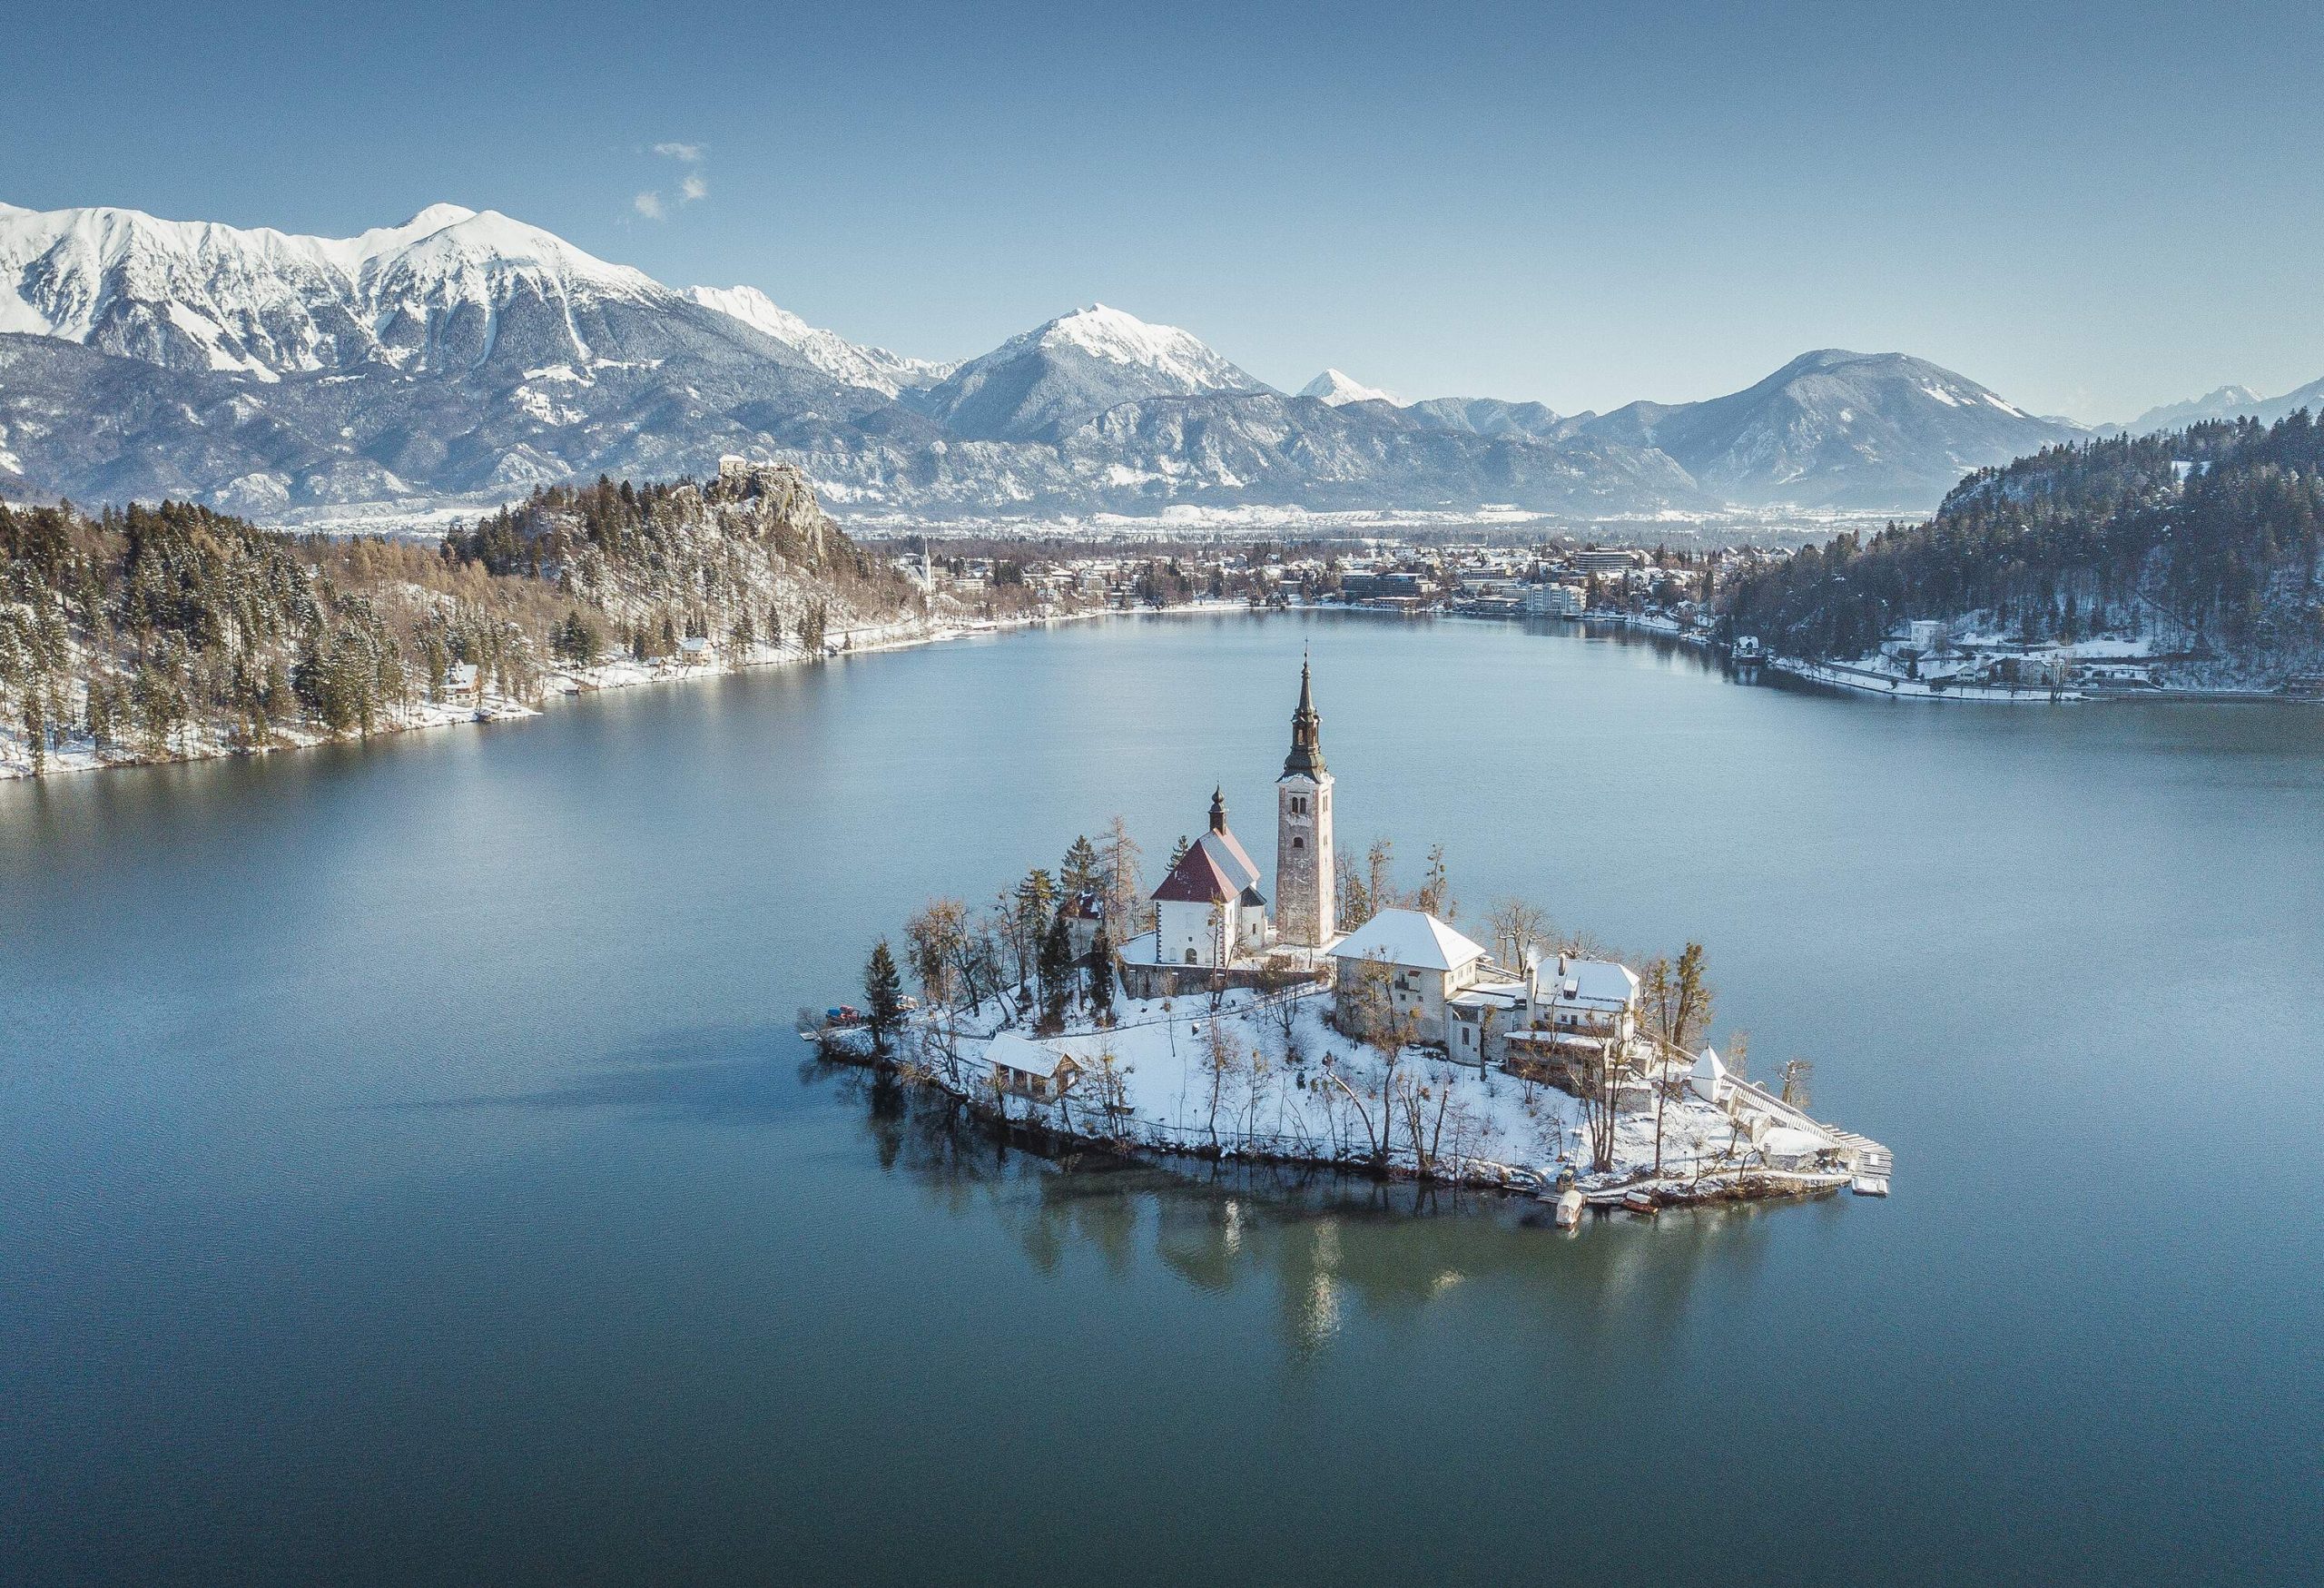 Panoramic view of famous Bled Island (Blejski otok) at scenic Lake Bled with Bled Castle (Blejski grad) and Julian Alps in the background on a beautiful sunny day in winter, Slovenia